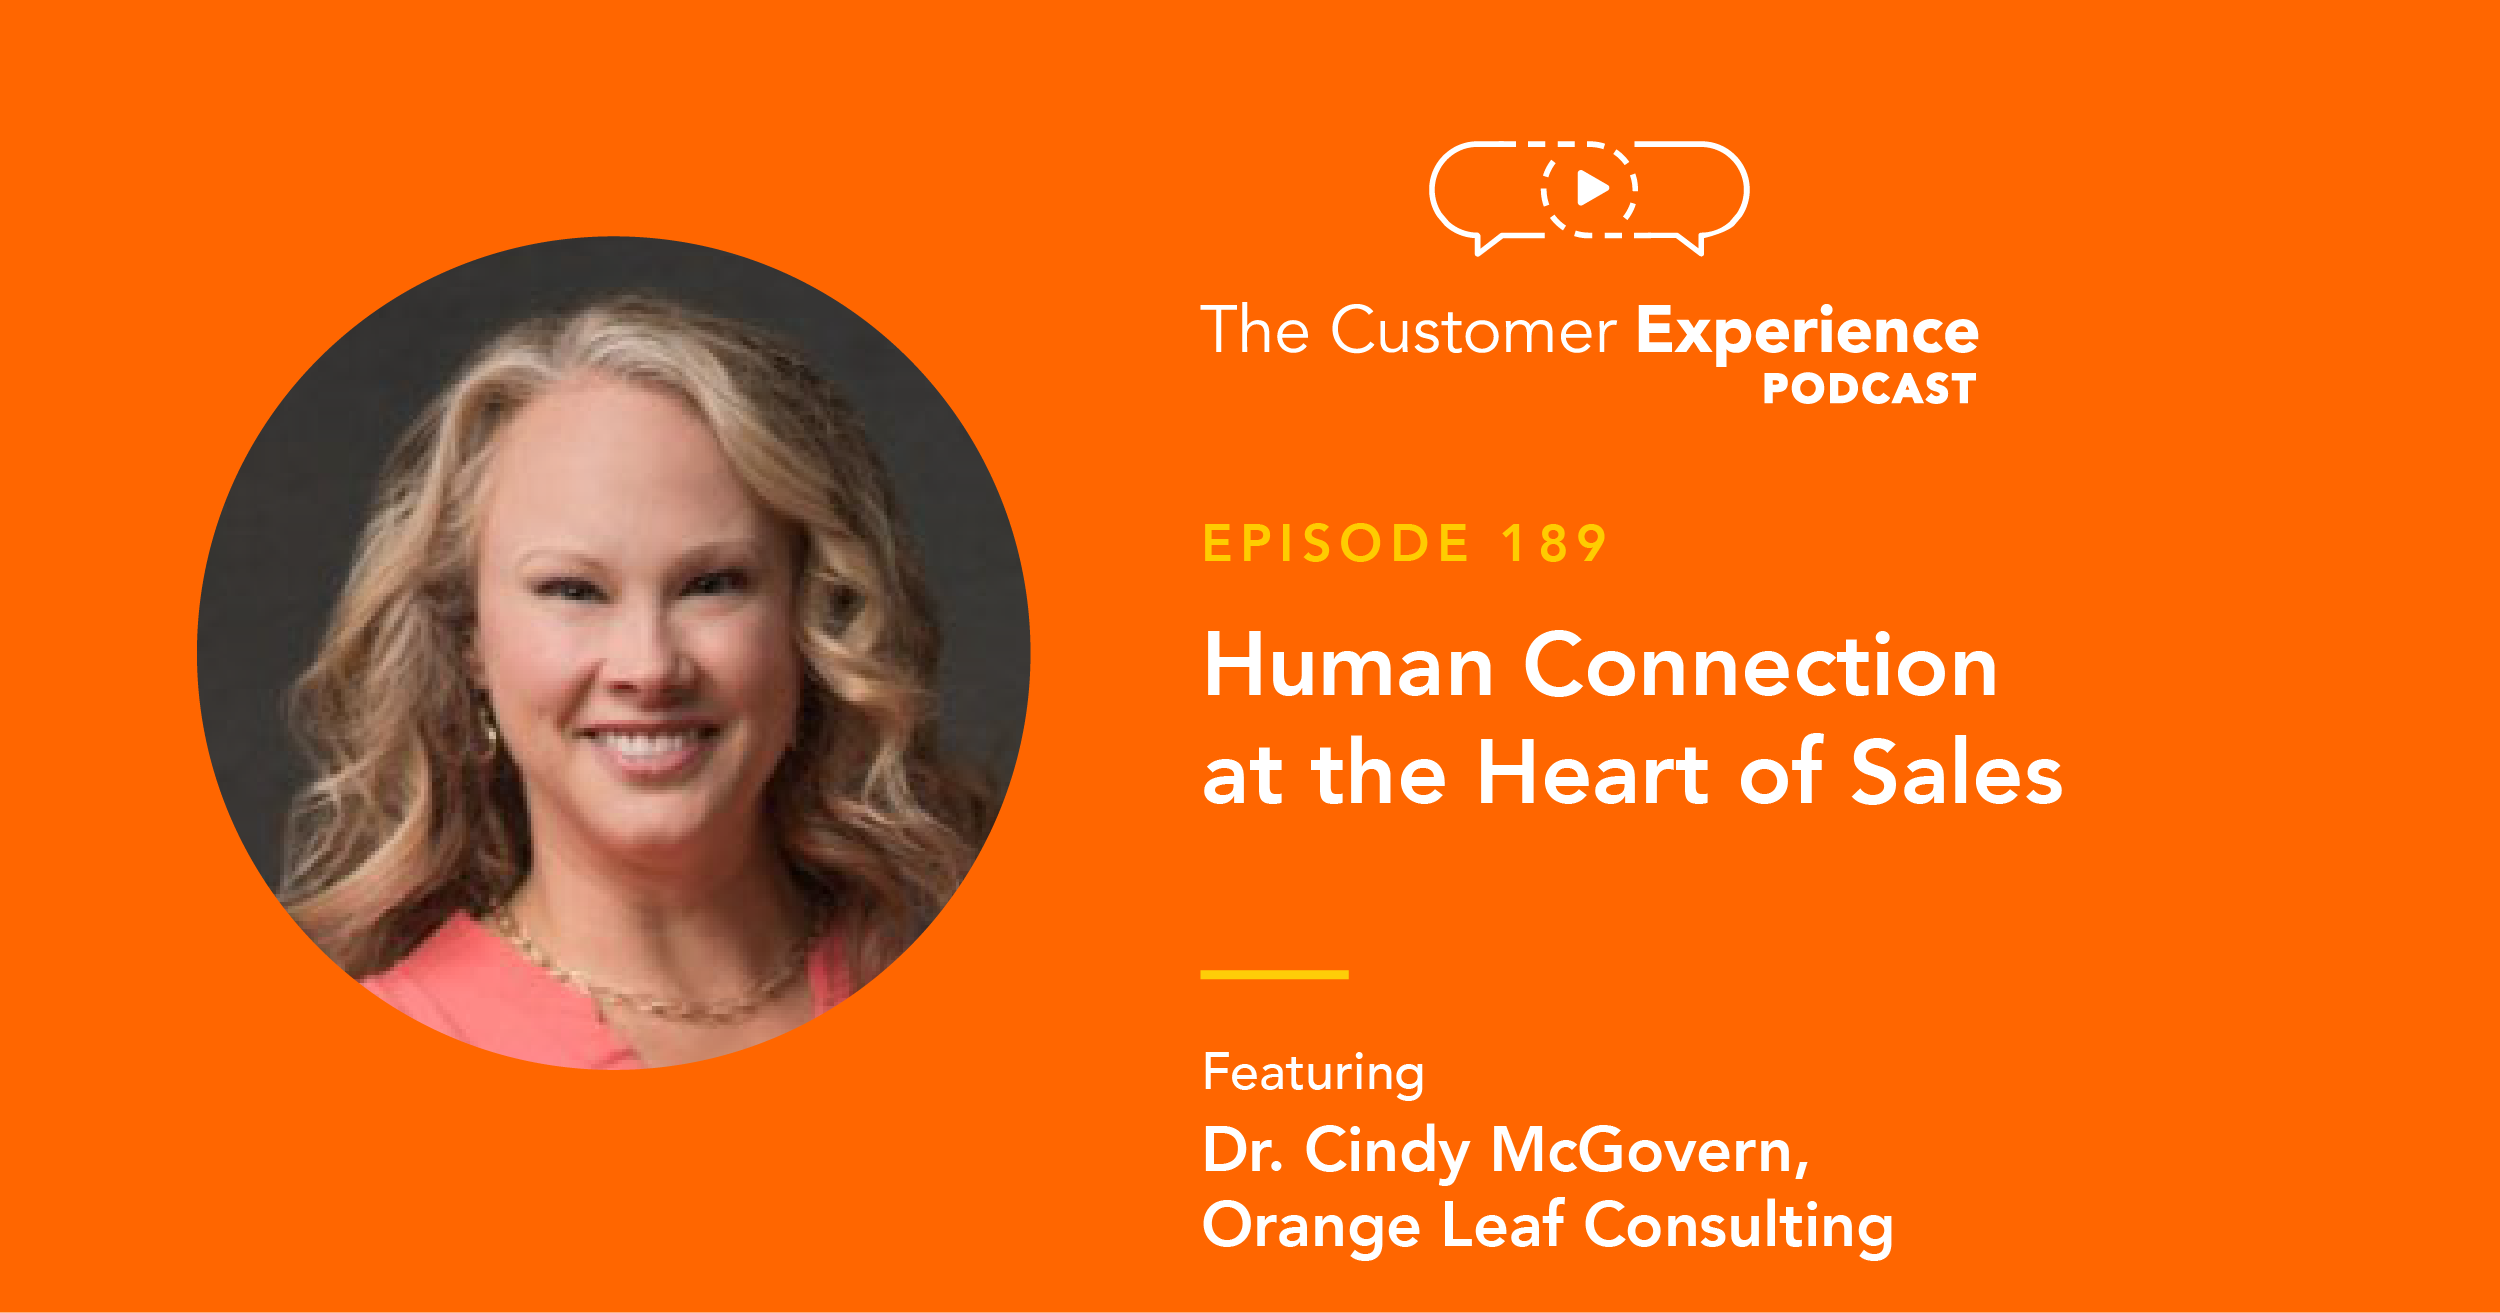 Dr. Cindy McGovern, Dr Cindy, Orange Leaf Consulting, Every Job Is A Sales Job, Sales, The Customer Experience Podcast, selling, to sell is human, salesperson